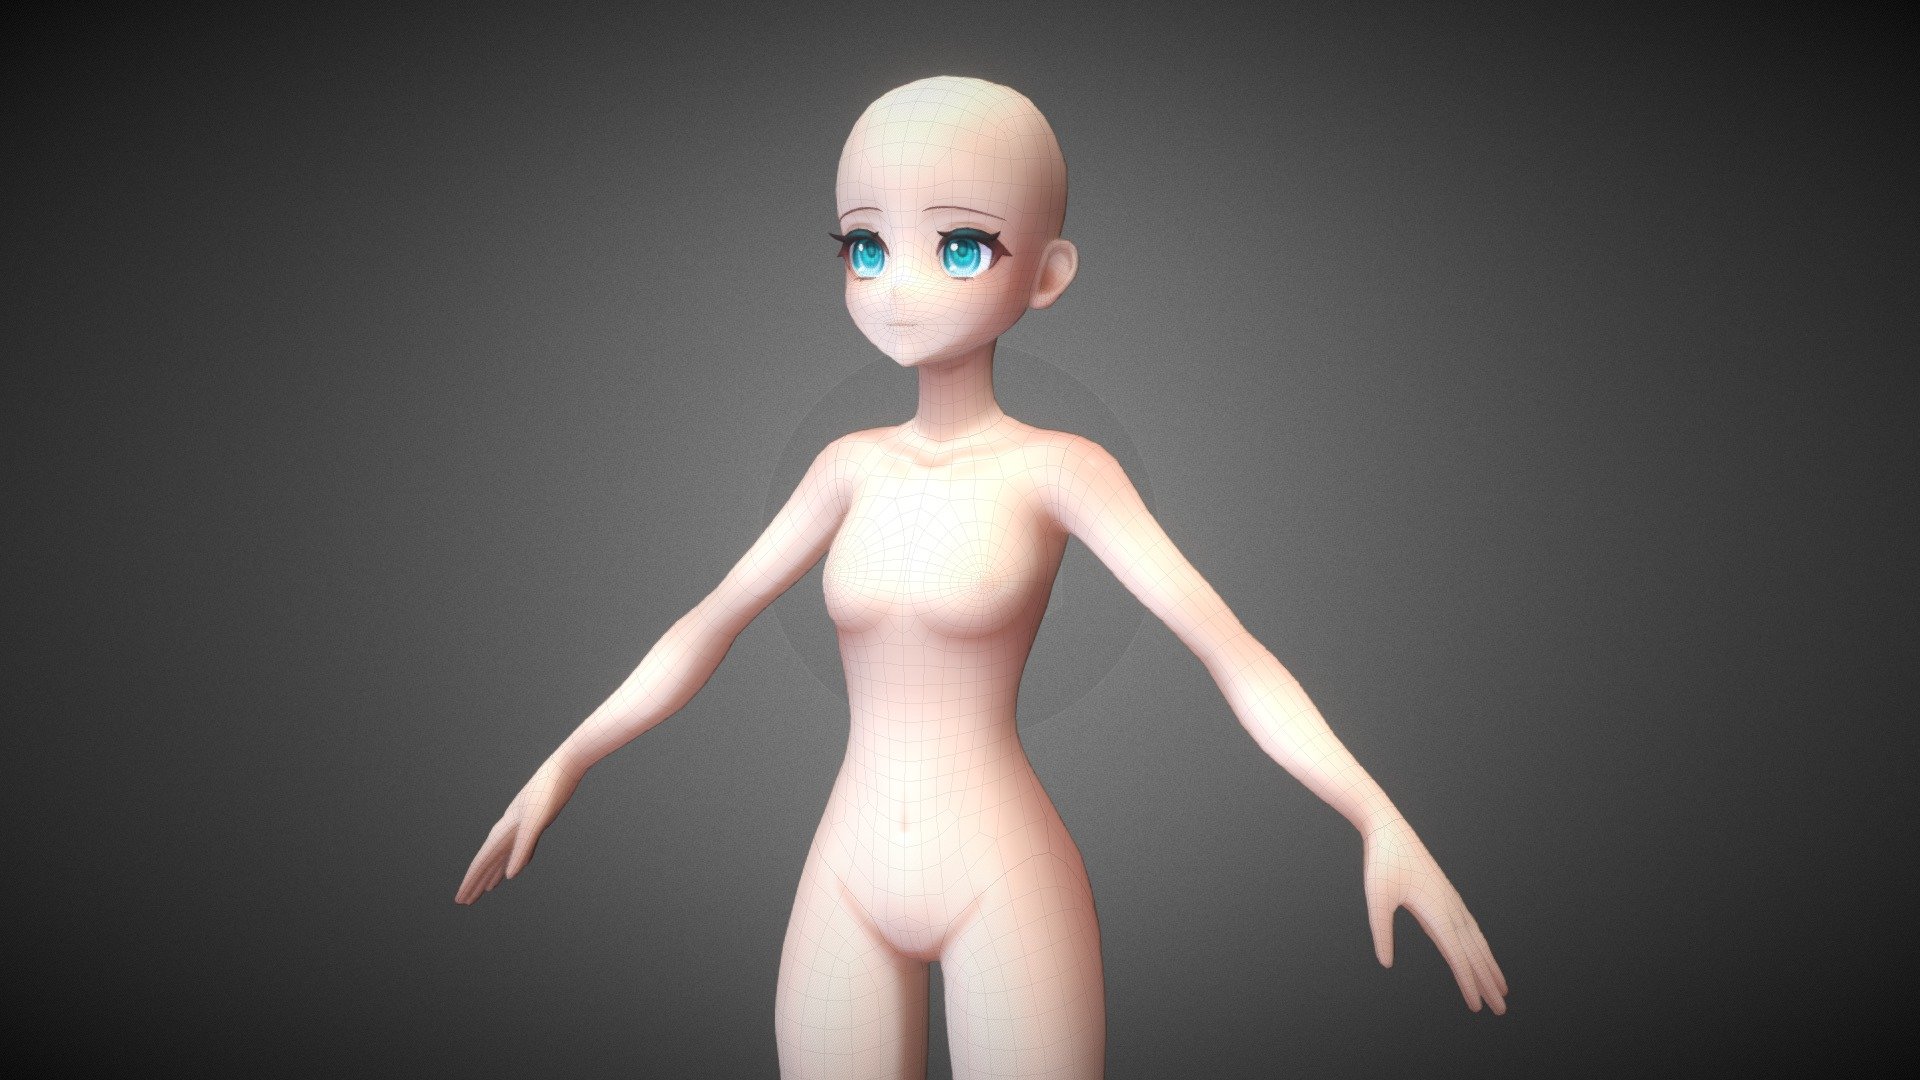 Polygons : 12,490

Features :

Anime Style base model that can be a kickstart to making assets for Games, Animations, Vtuber, Figurine, etc. 100% Quads, Clean topology, Rigging Ready, Subdivision Ready Symmetrical with the origin point at the center of the grid floor (ready for mirroring) UV Unwrapped FBX and Blend (Native) files included

included : FBX / OBJ / Blender / PNG.texture - Base Anime Stylize lowpoly with texture - 3D model by Kll.Banoffii 3d model